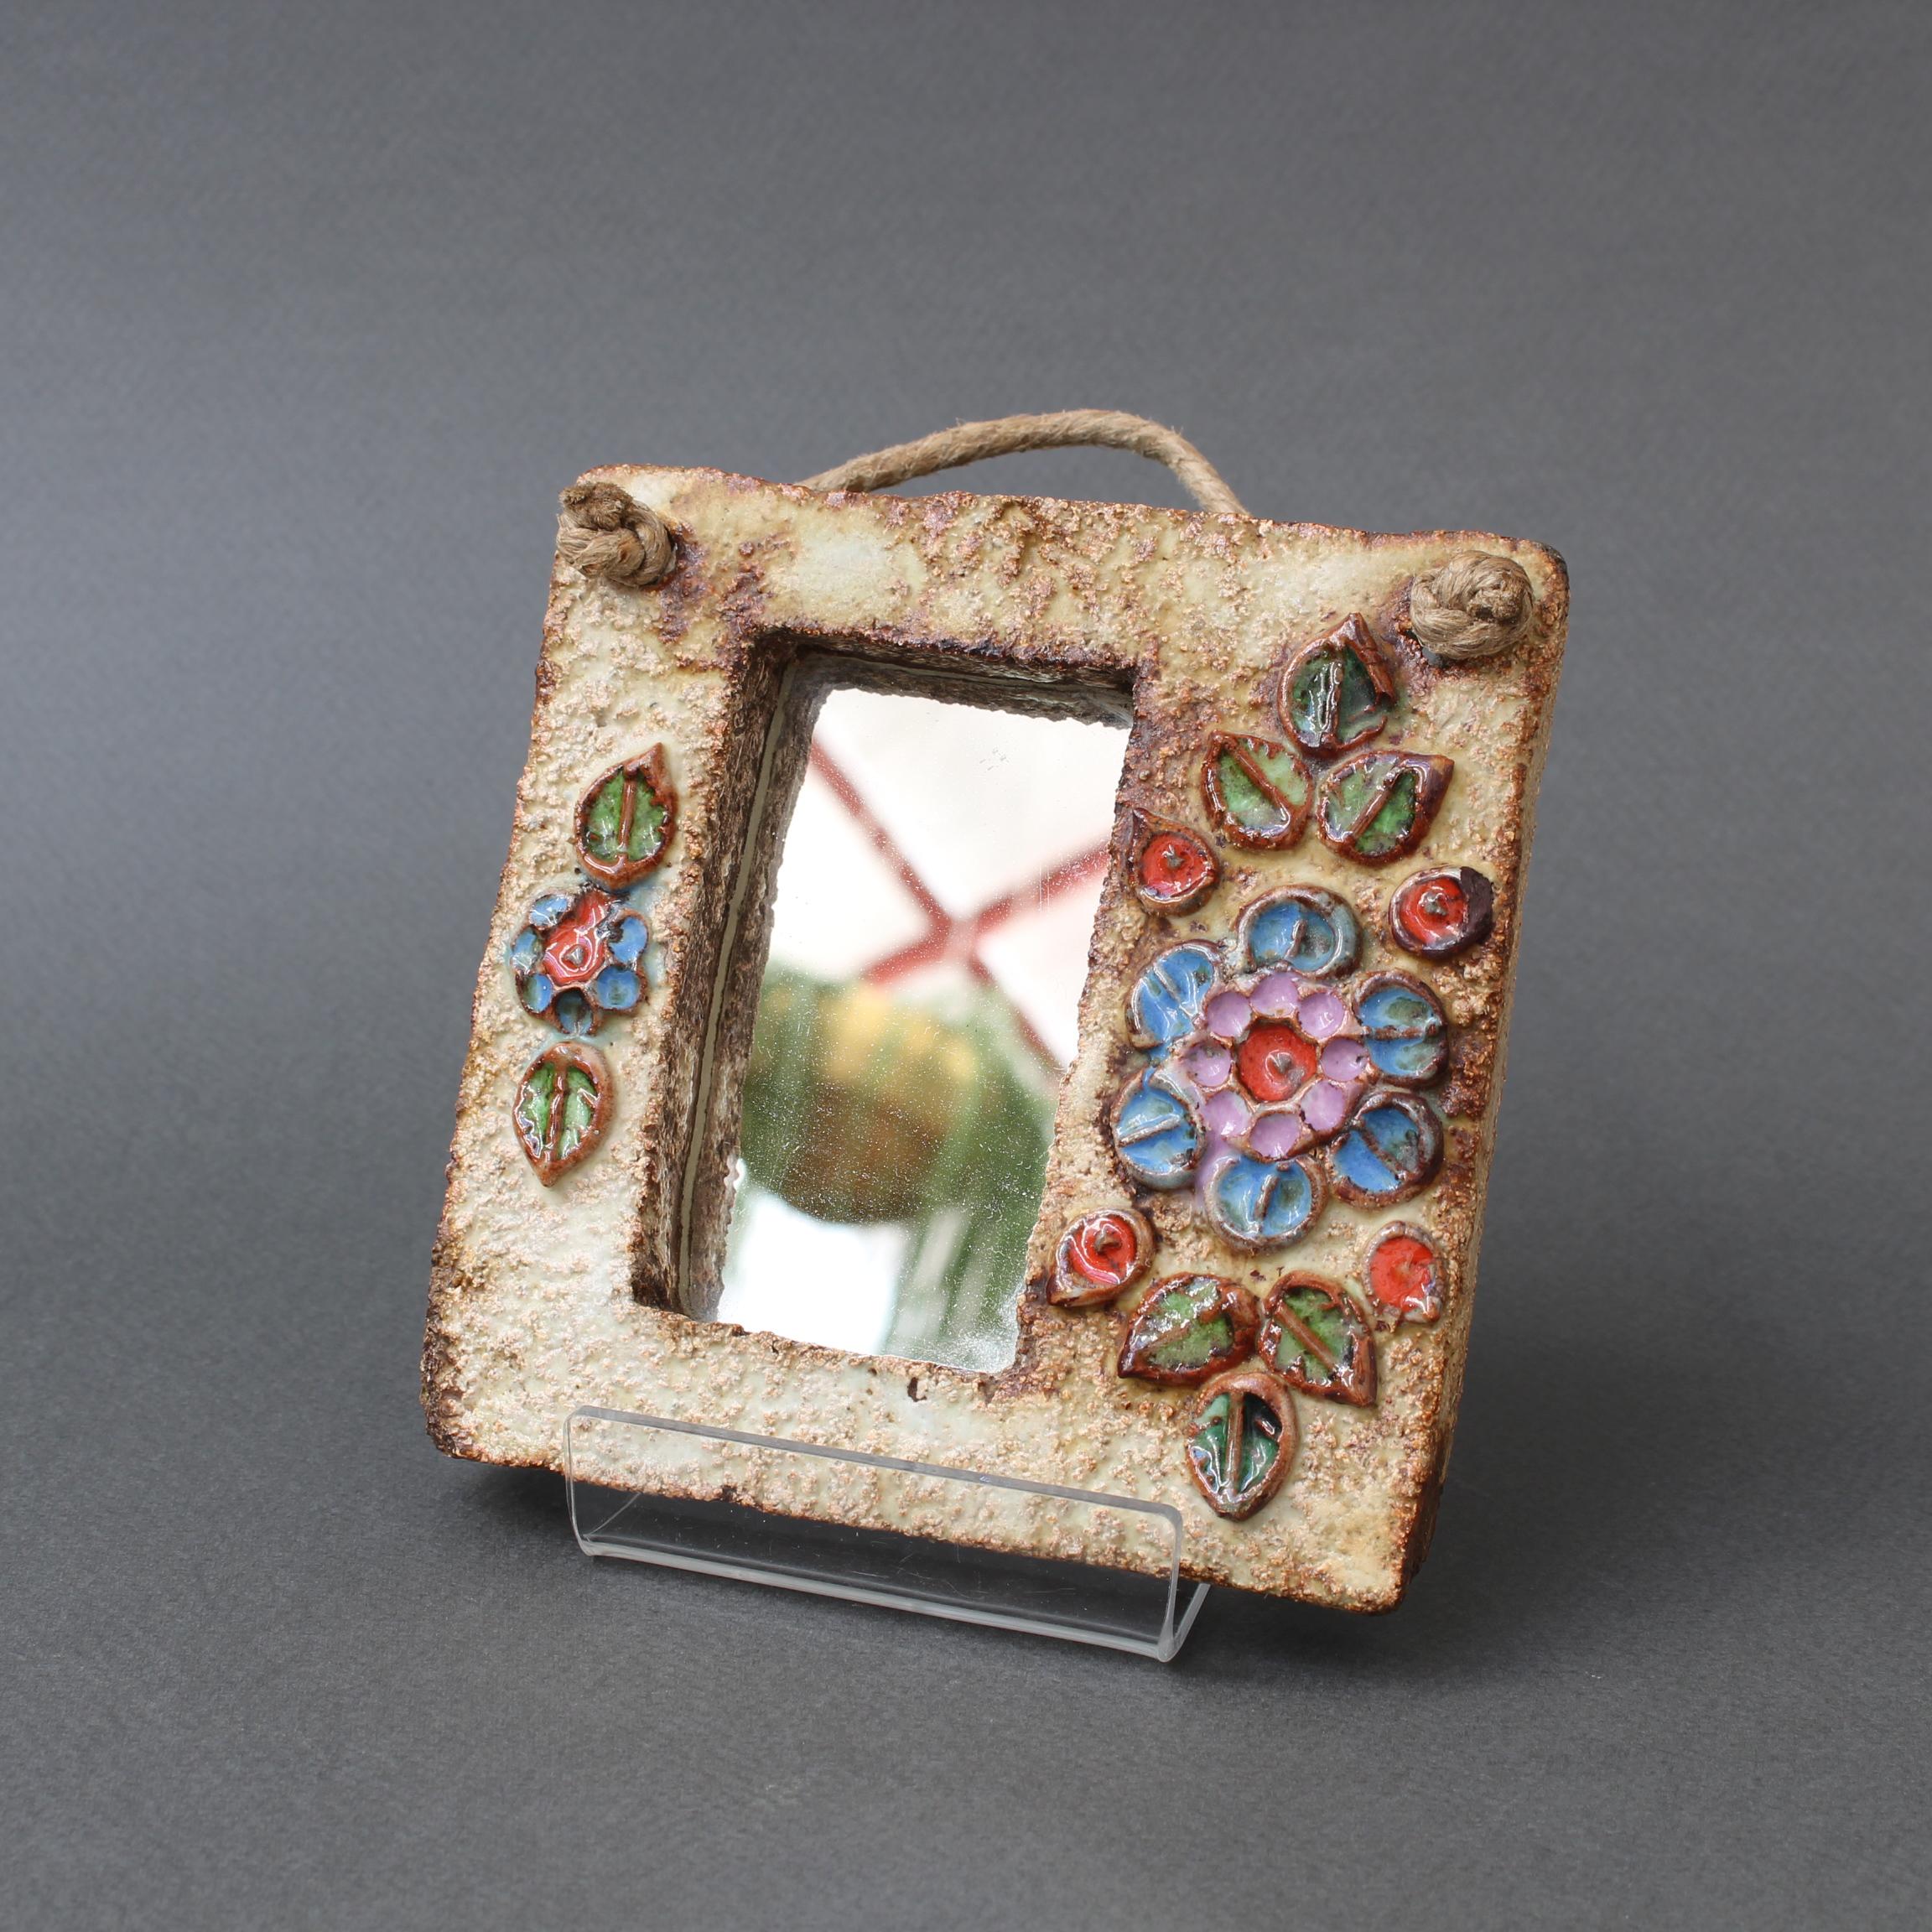 Rustic French Ceramic Wall Mirror with Flower Motif by La Roue 'circa 1960s', Small